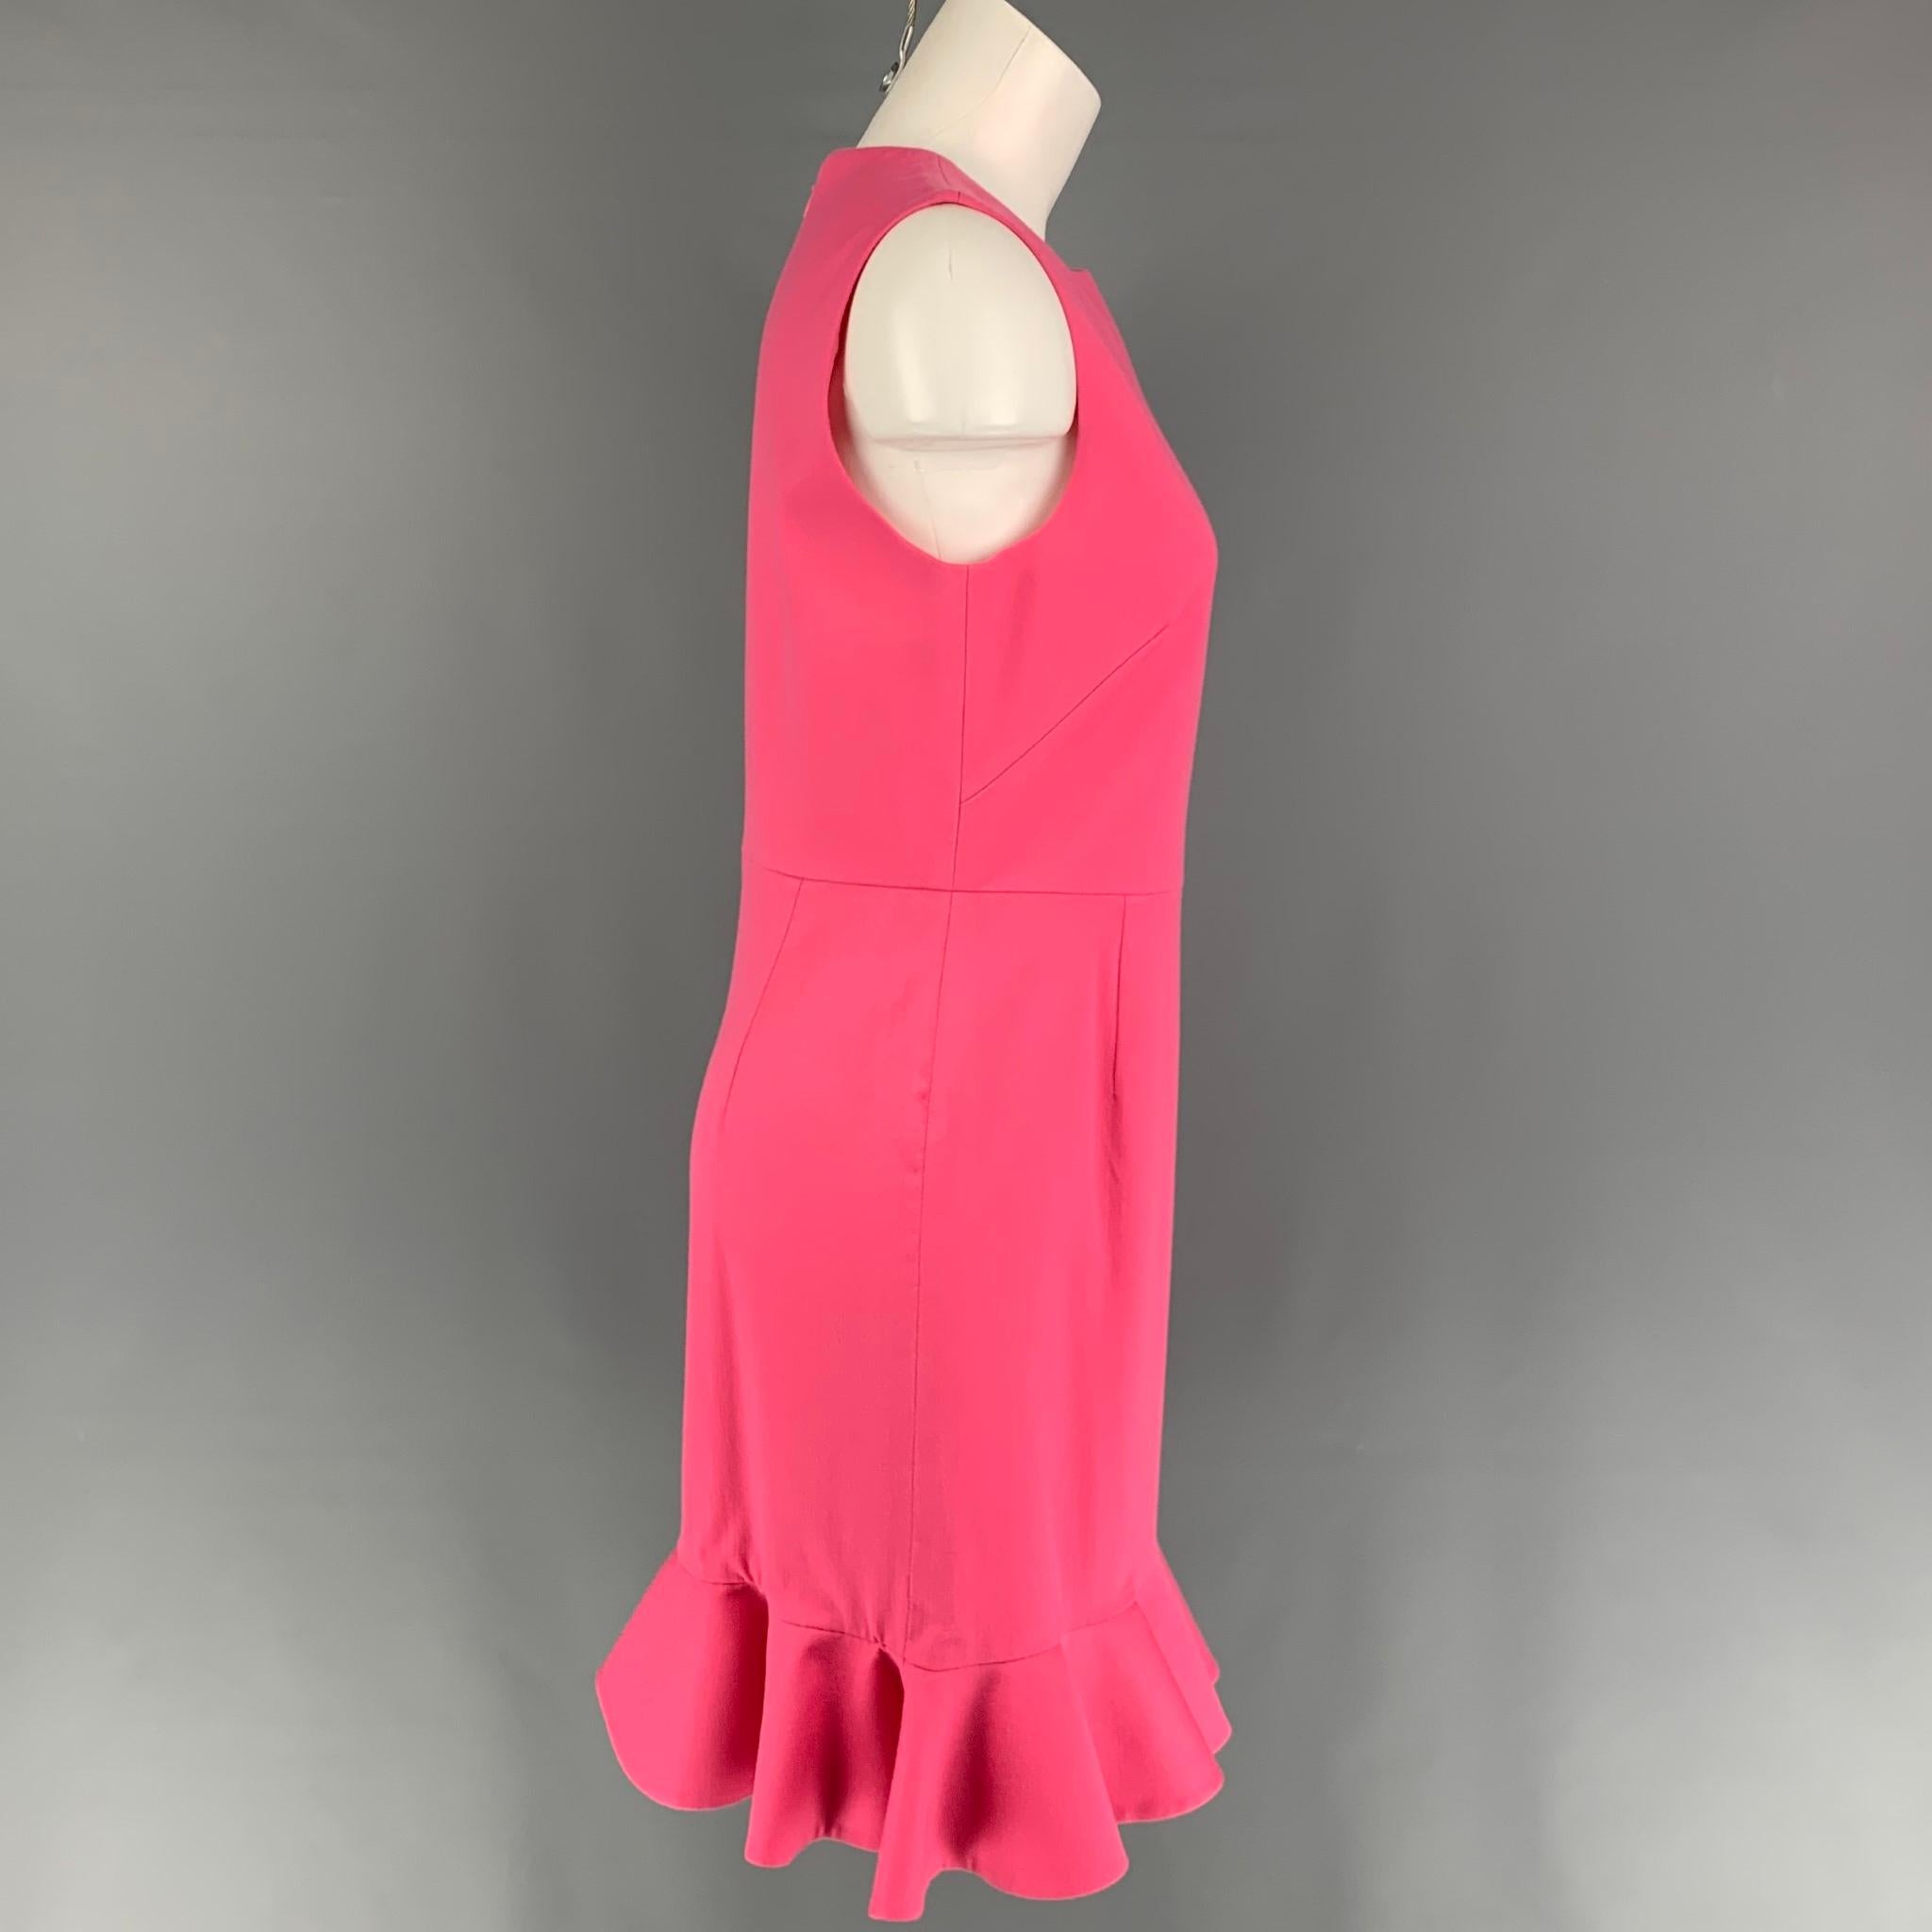 VALENTINO dress comes in a pink wool blend featuring a ruffled hem, sleeveless, and a back zip up closure. Made in Italy. 

Very Good Pre-Owned Condition.
Marked: 8

Measurements:

Shoulder: 13.5 in.
Bust: 34 in.
Waist: 30 in.
Hip: 36 in.
Length: